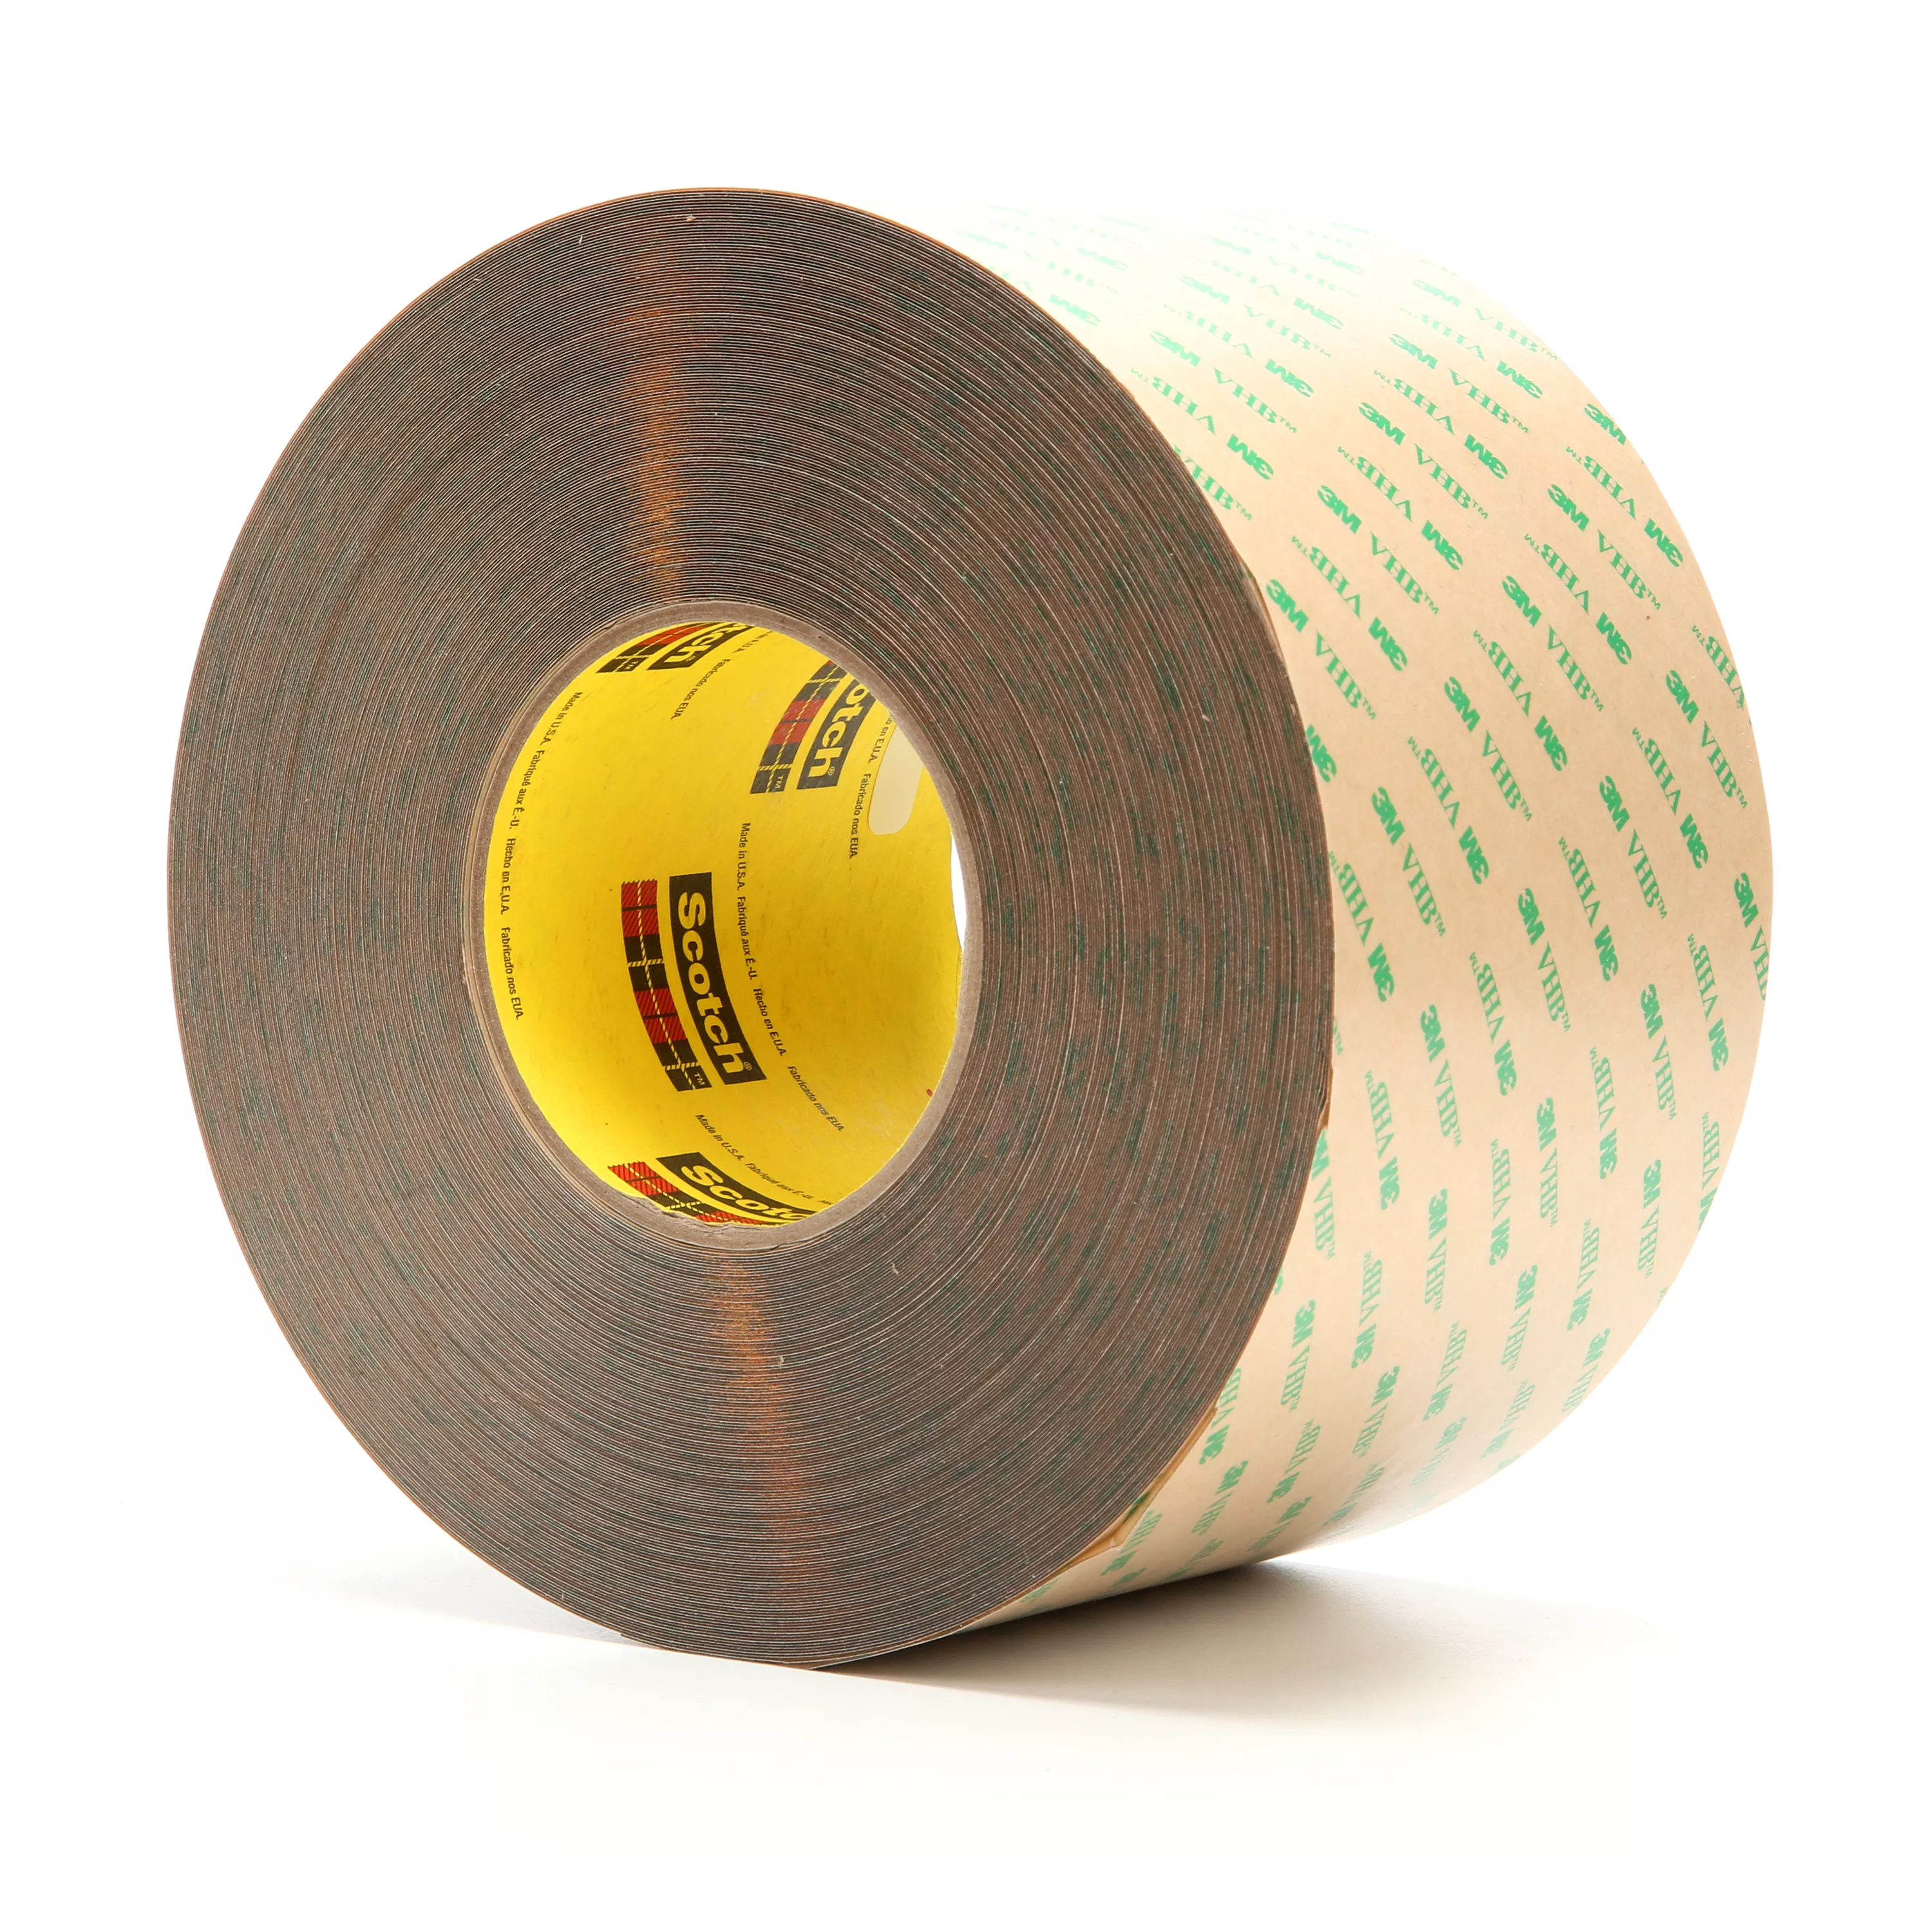 3M™ VHB™ Adhesive Transfer Tape F9473PC, Clear, 4 in x 60 yd, 10 Mil,
2/Case